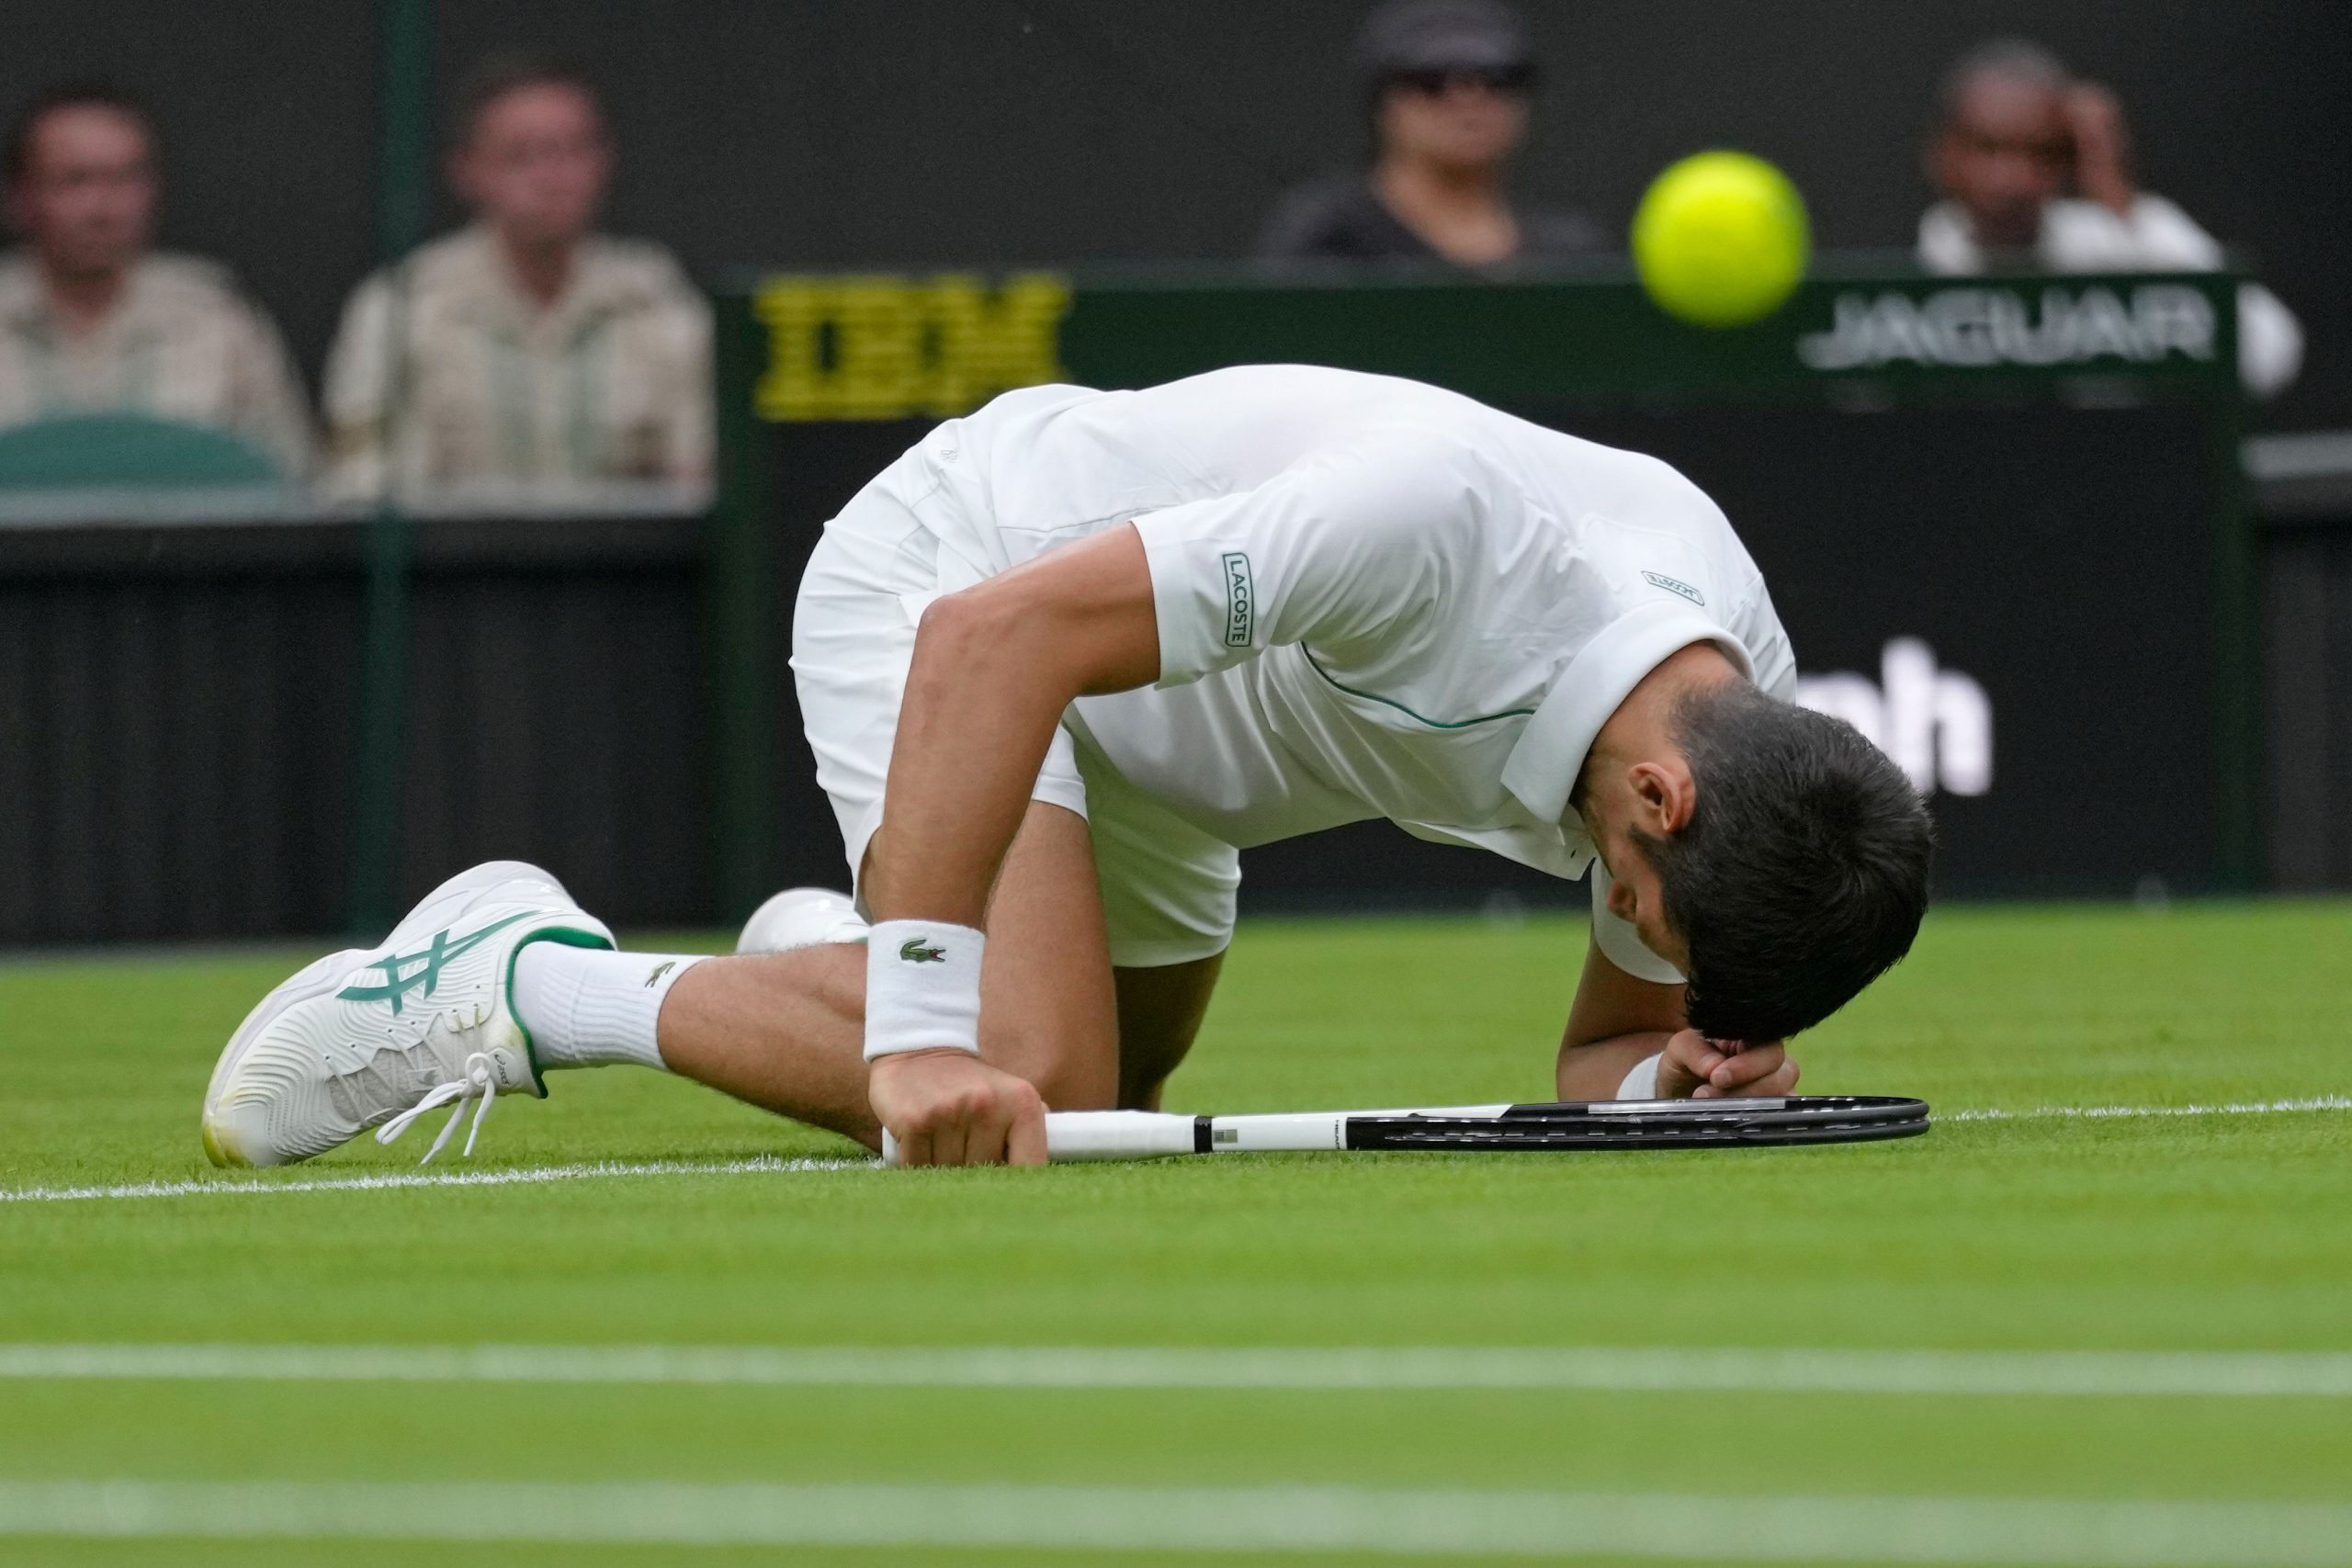 More history for Djokovic as he books 2nd round spot at Wimbledon